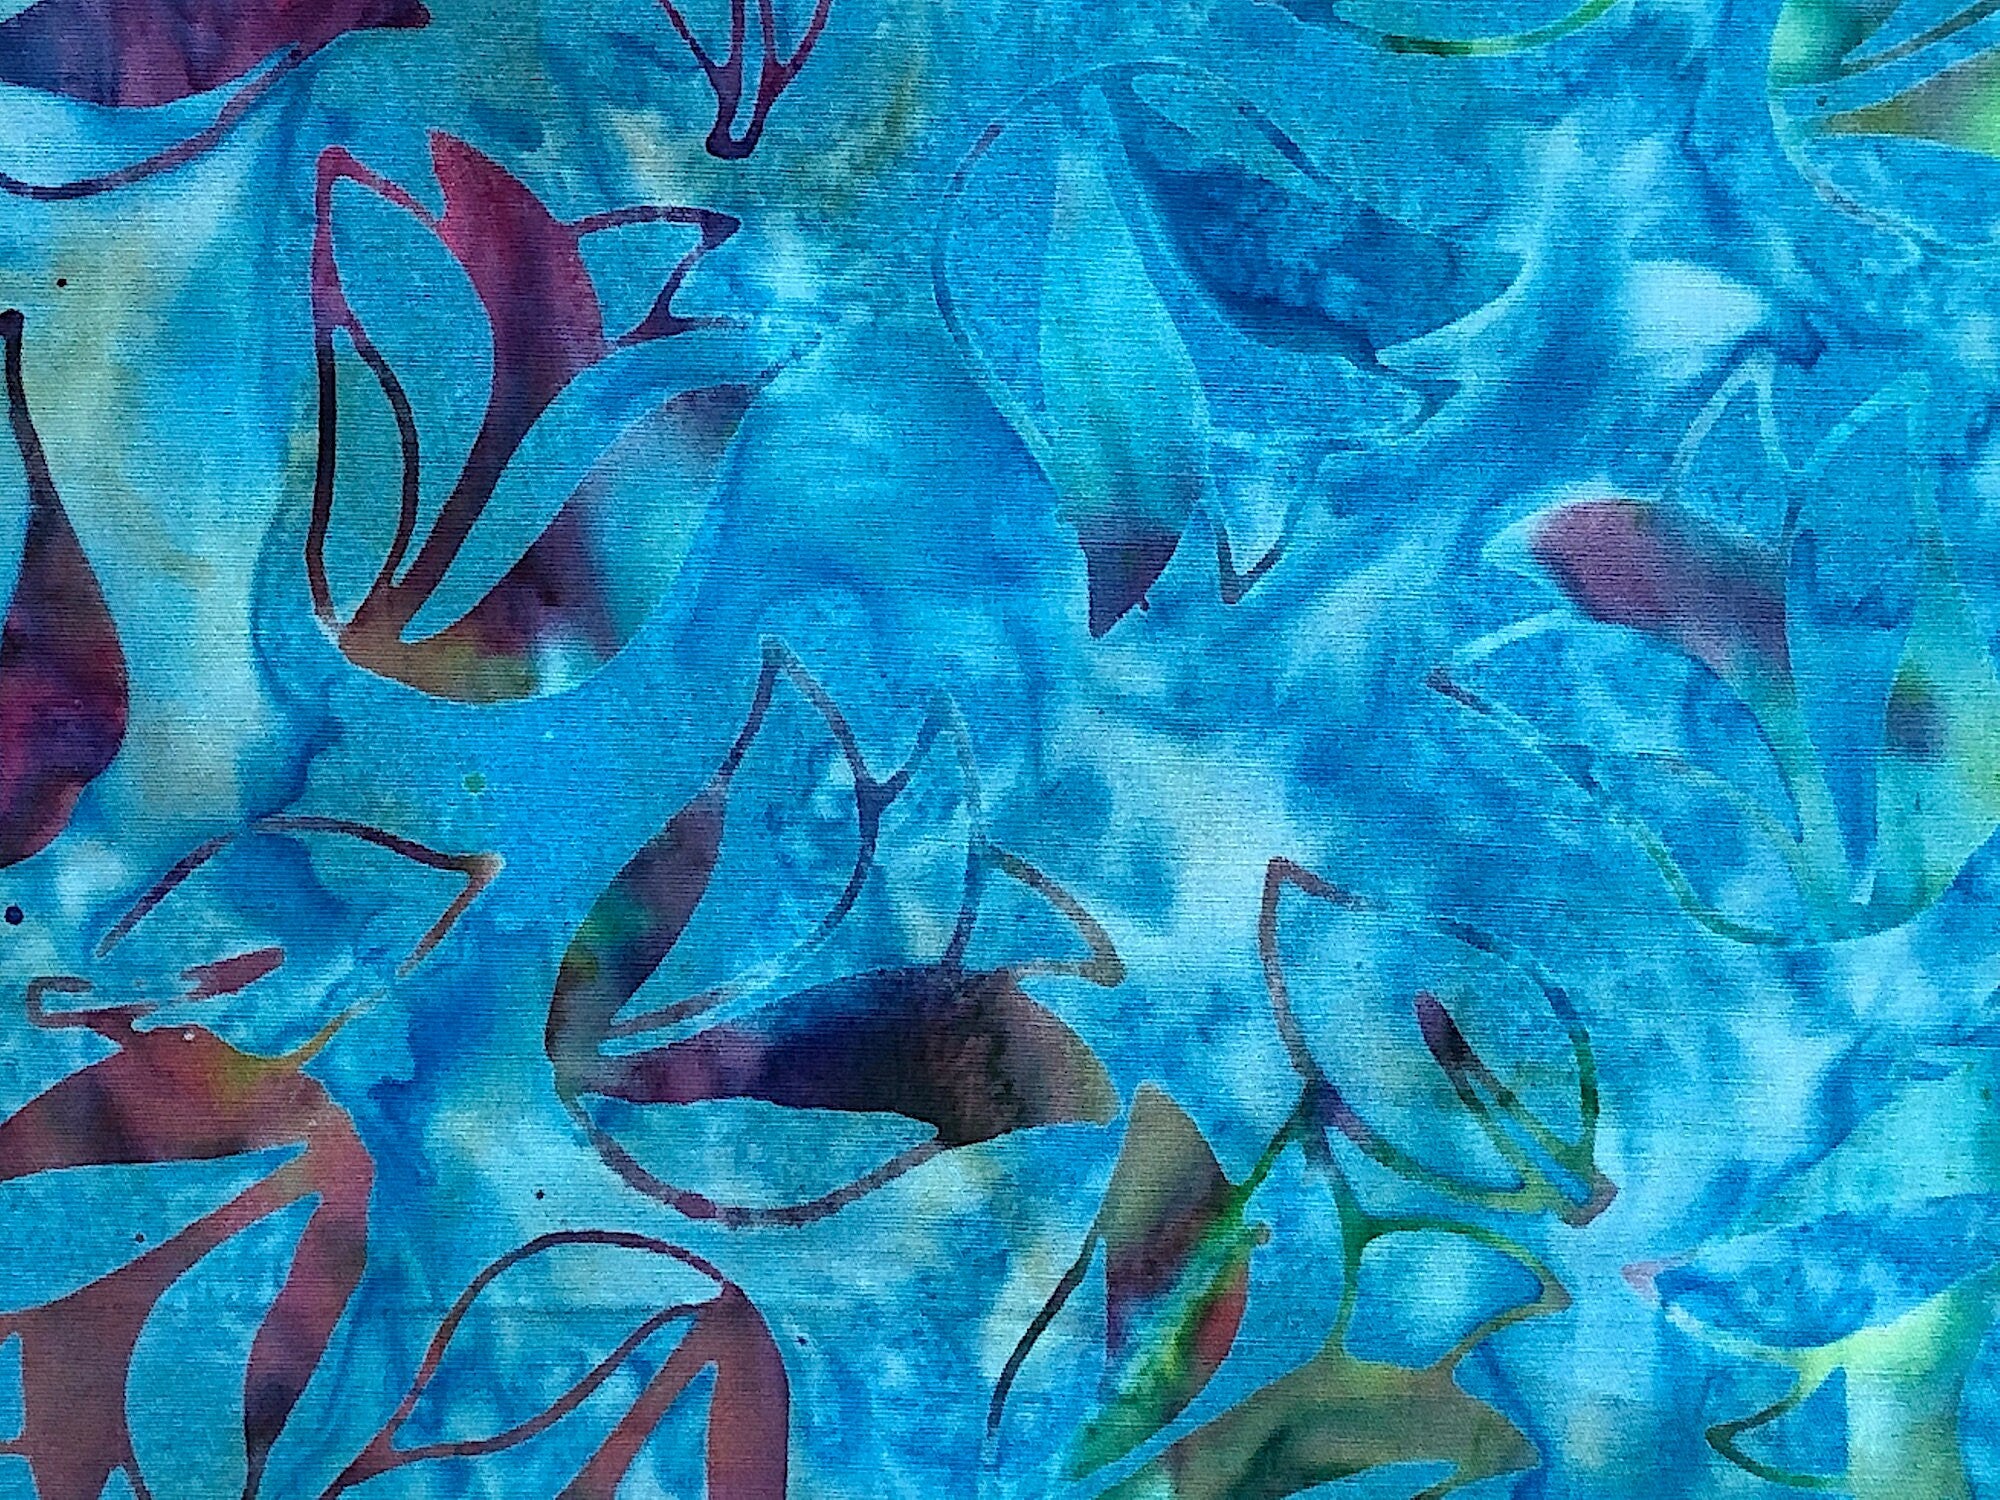 This batik fabric is covered with tulips. The tulips are shades of blue, green, yellow, red and orange.